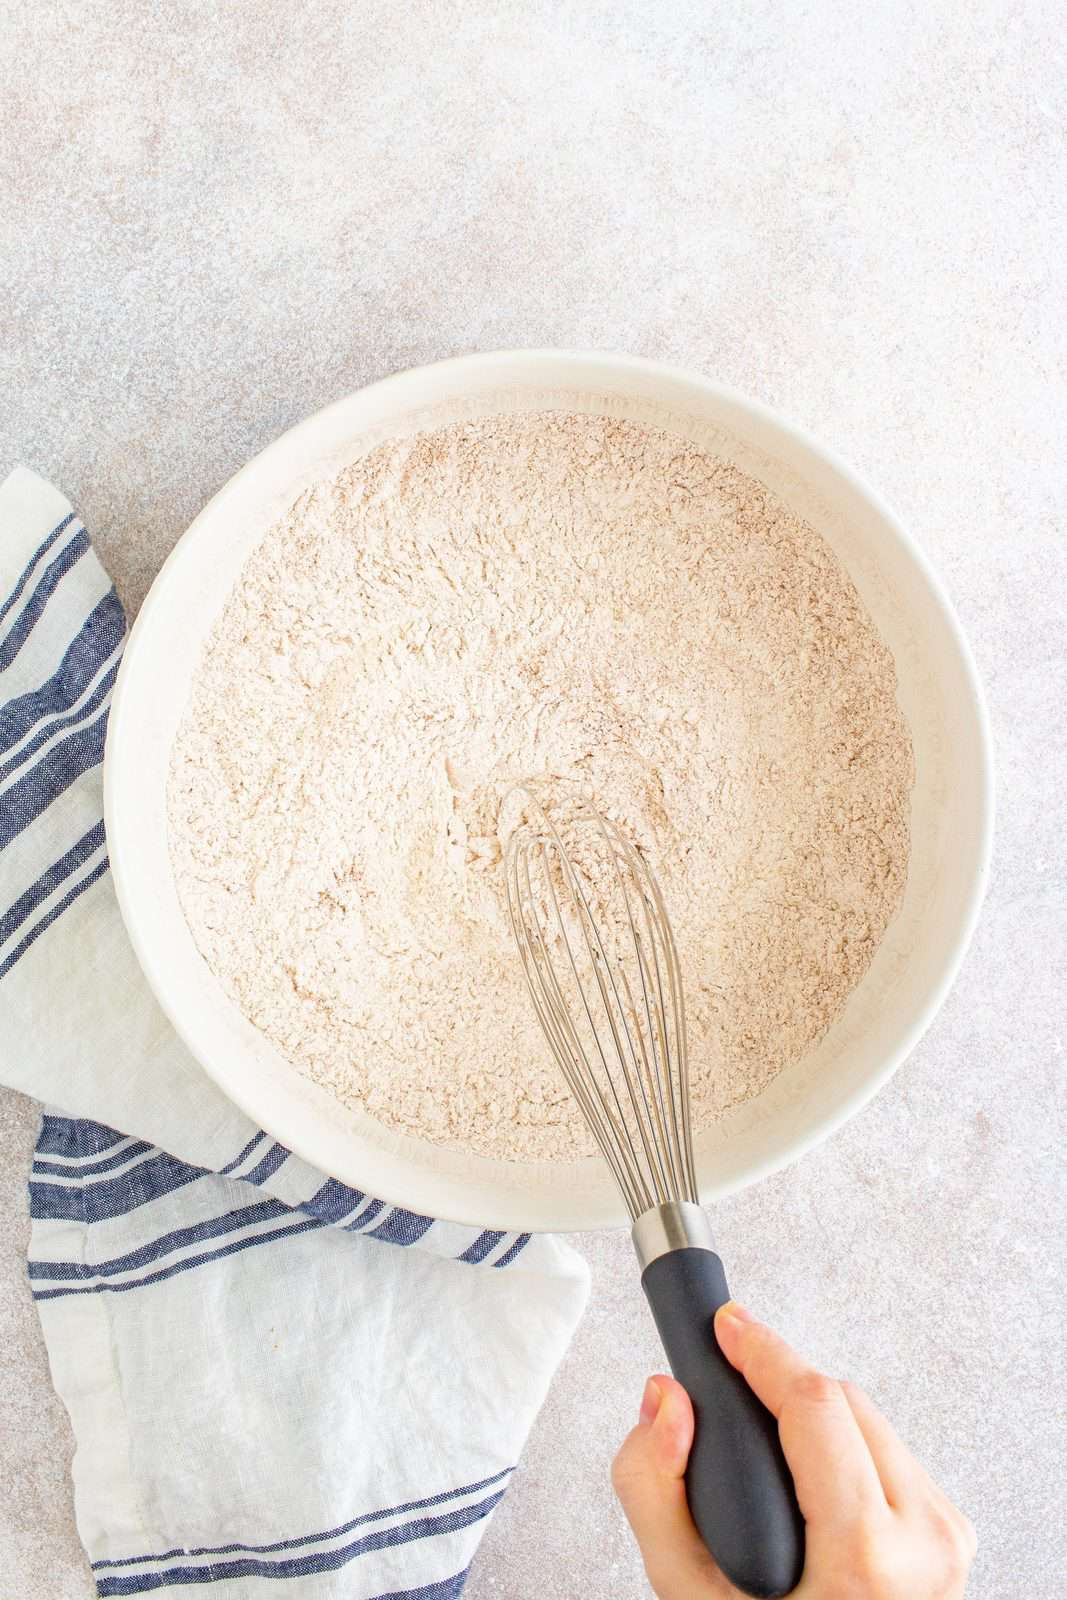 Dry ingredients whisked together in bowl.